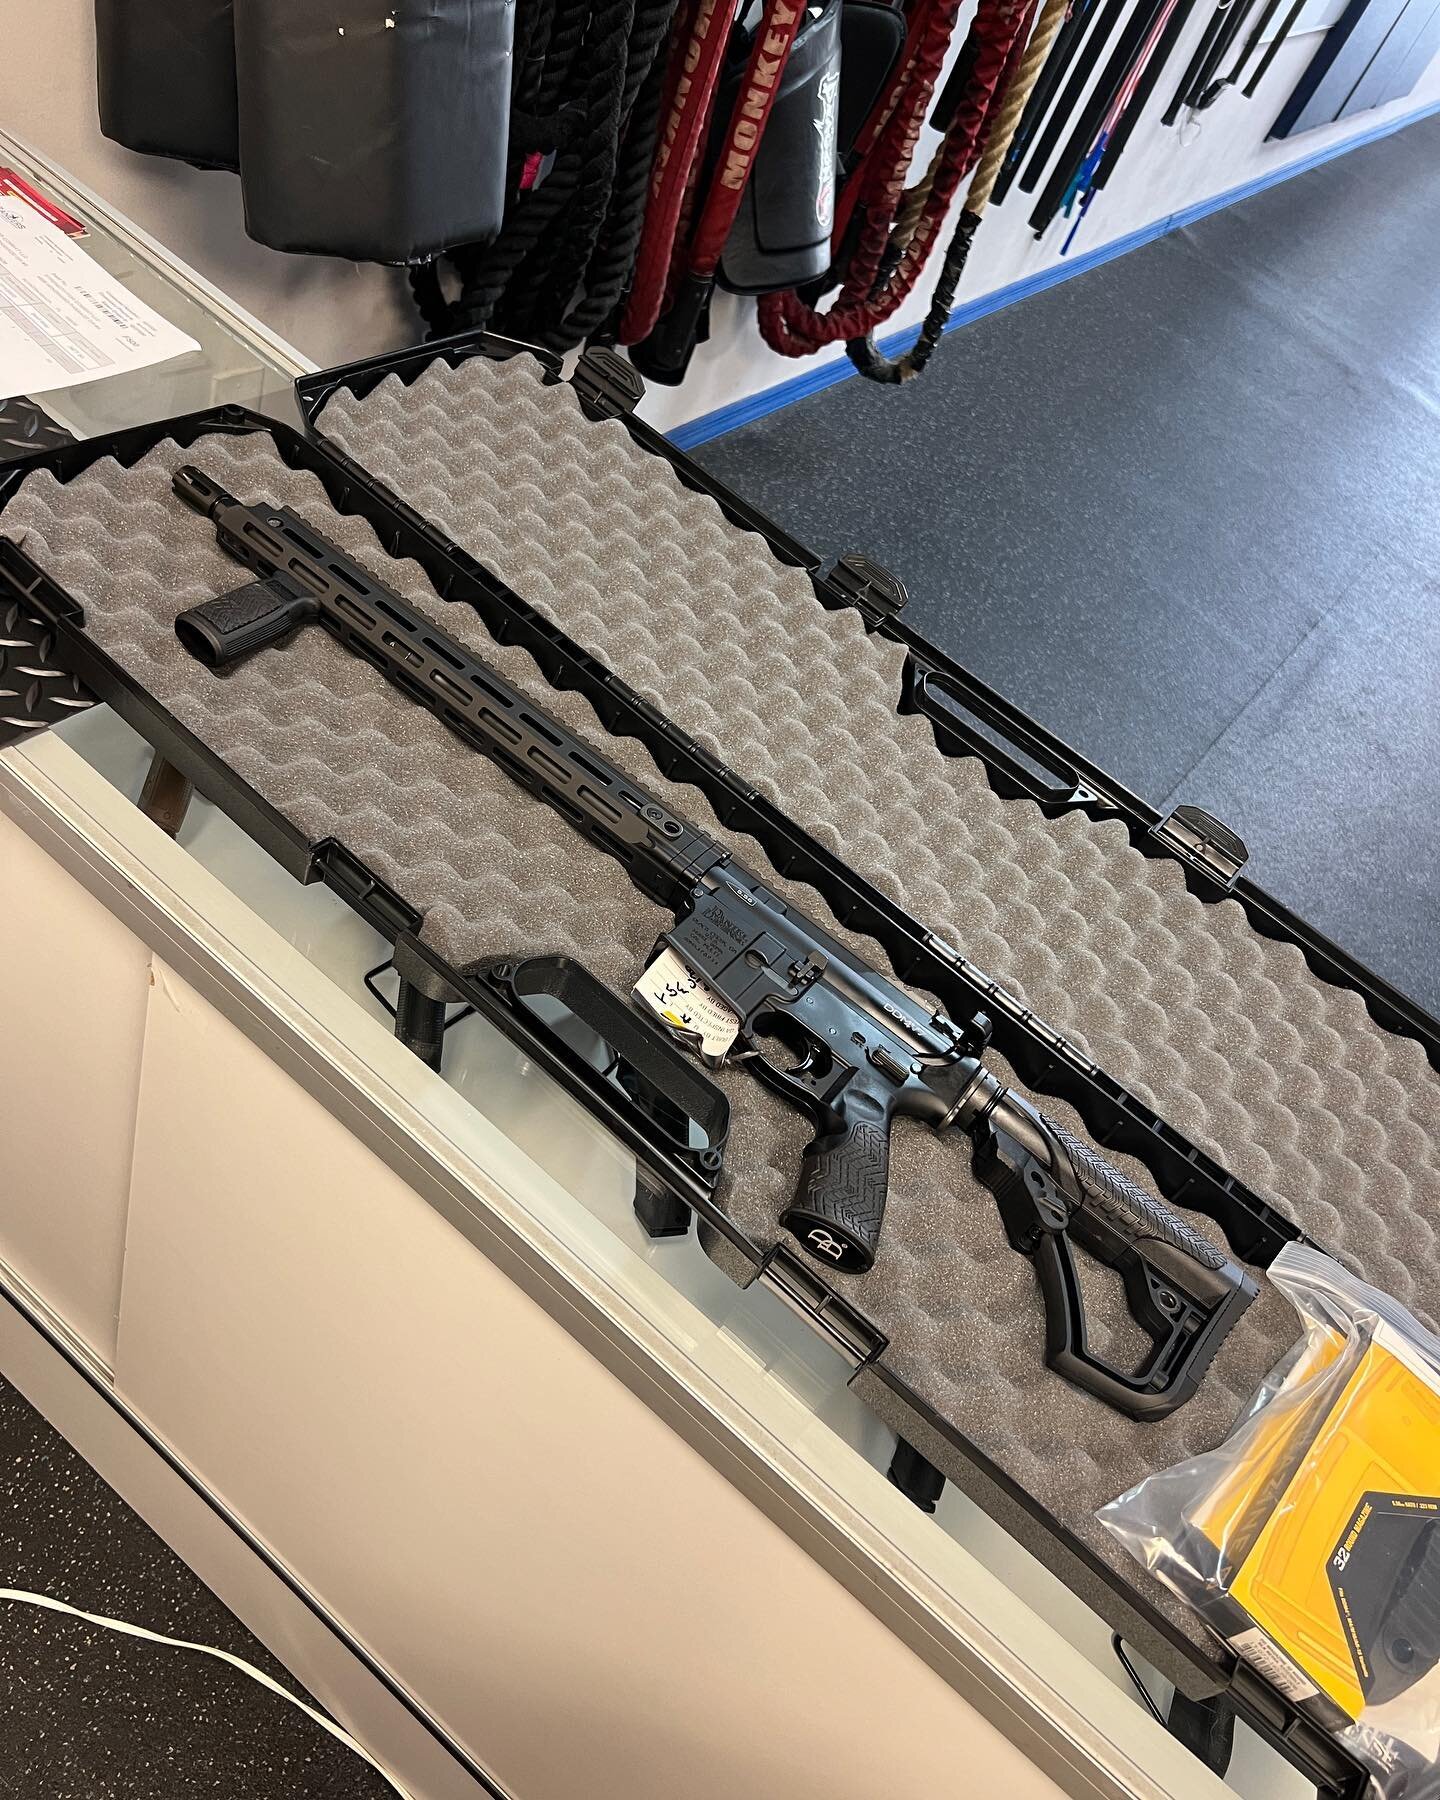 DDM4v7 New Arrival!! 
Come check it out at Boynton Guns today!
#danieldefense #DDM4 #556 #ar15